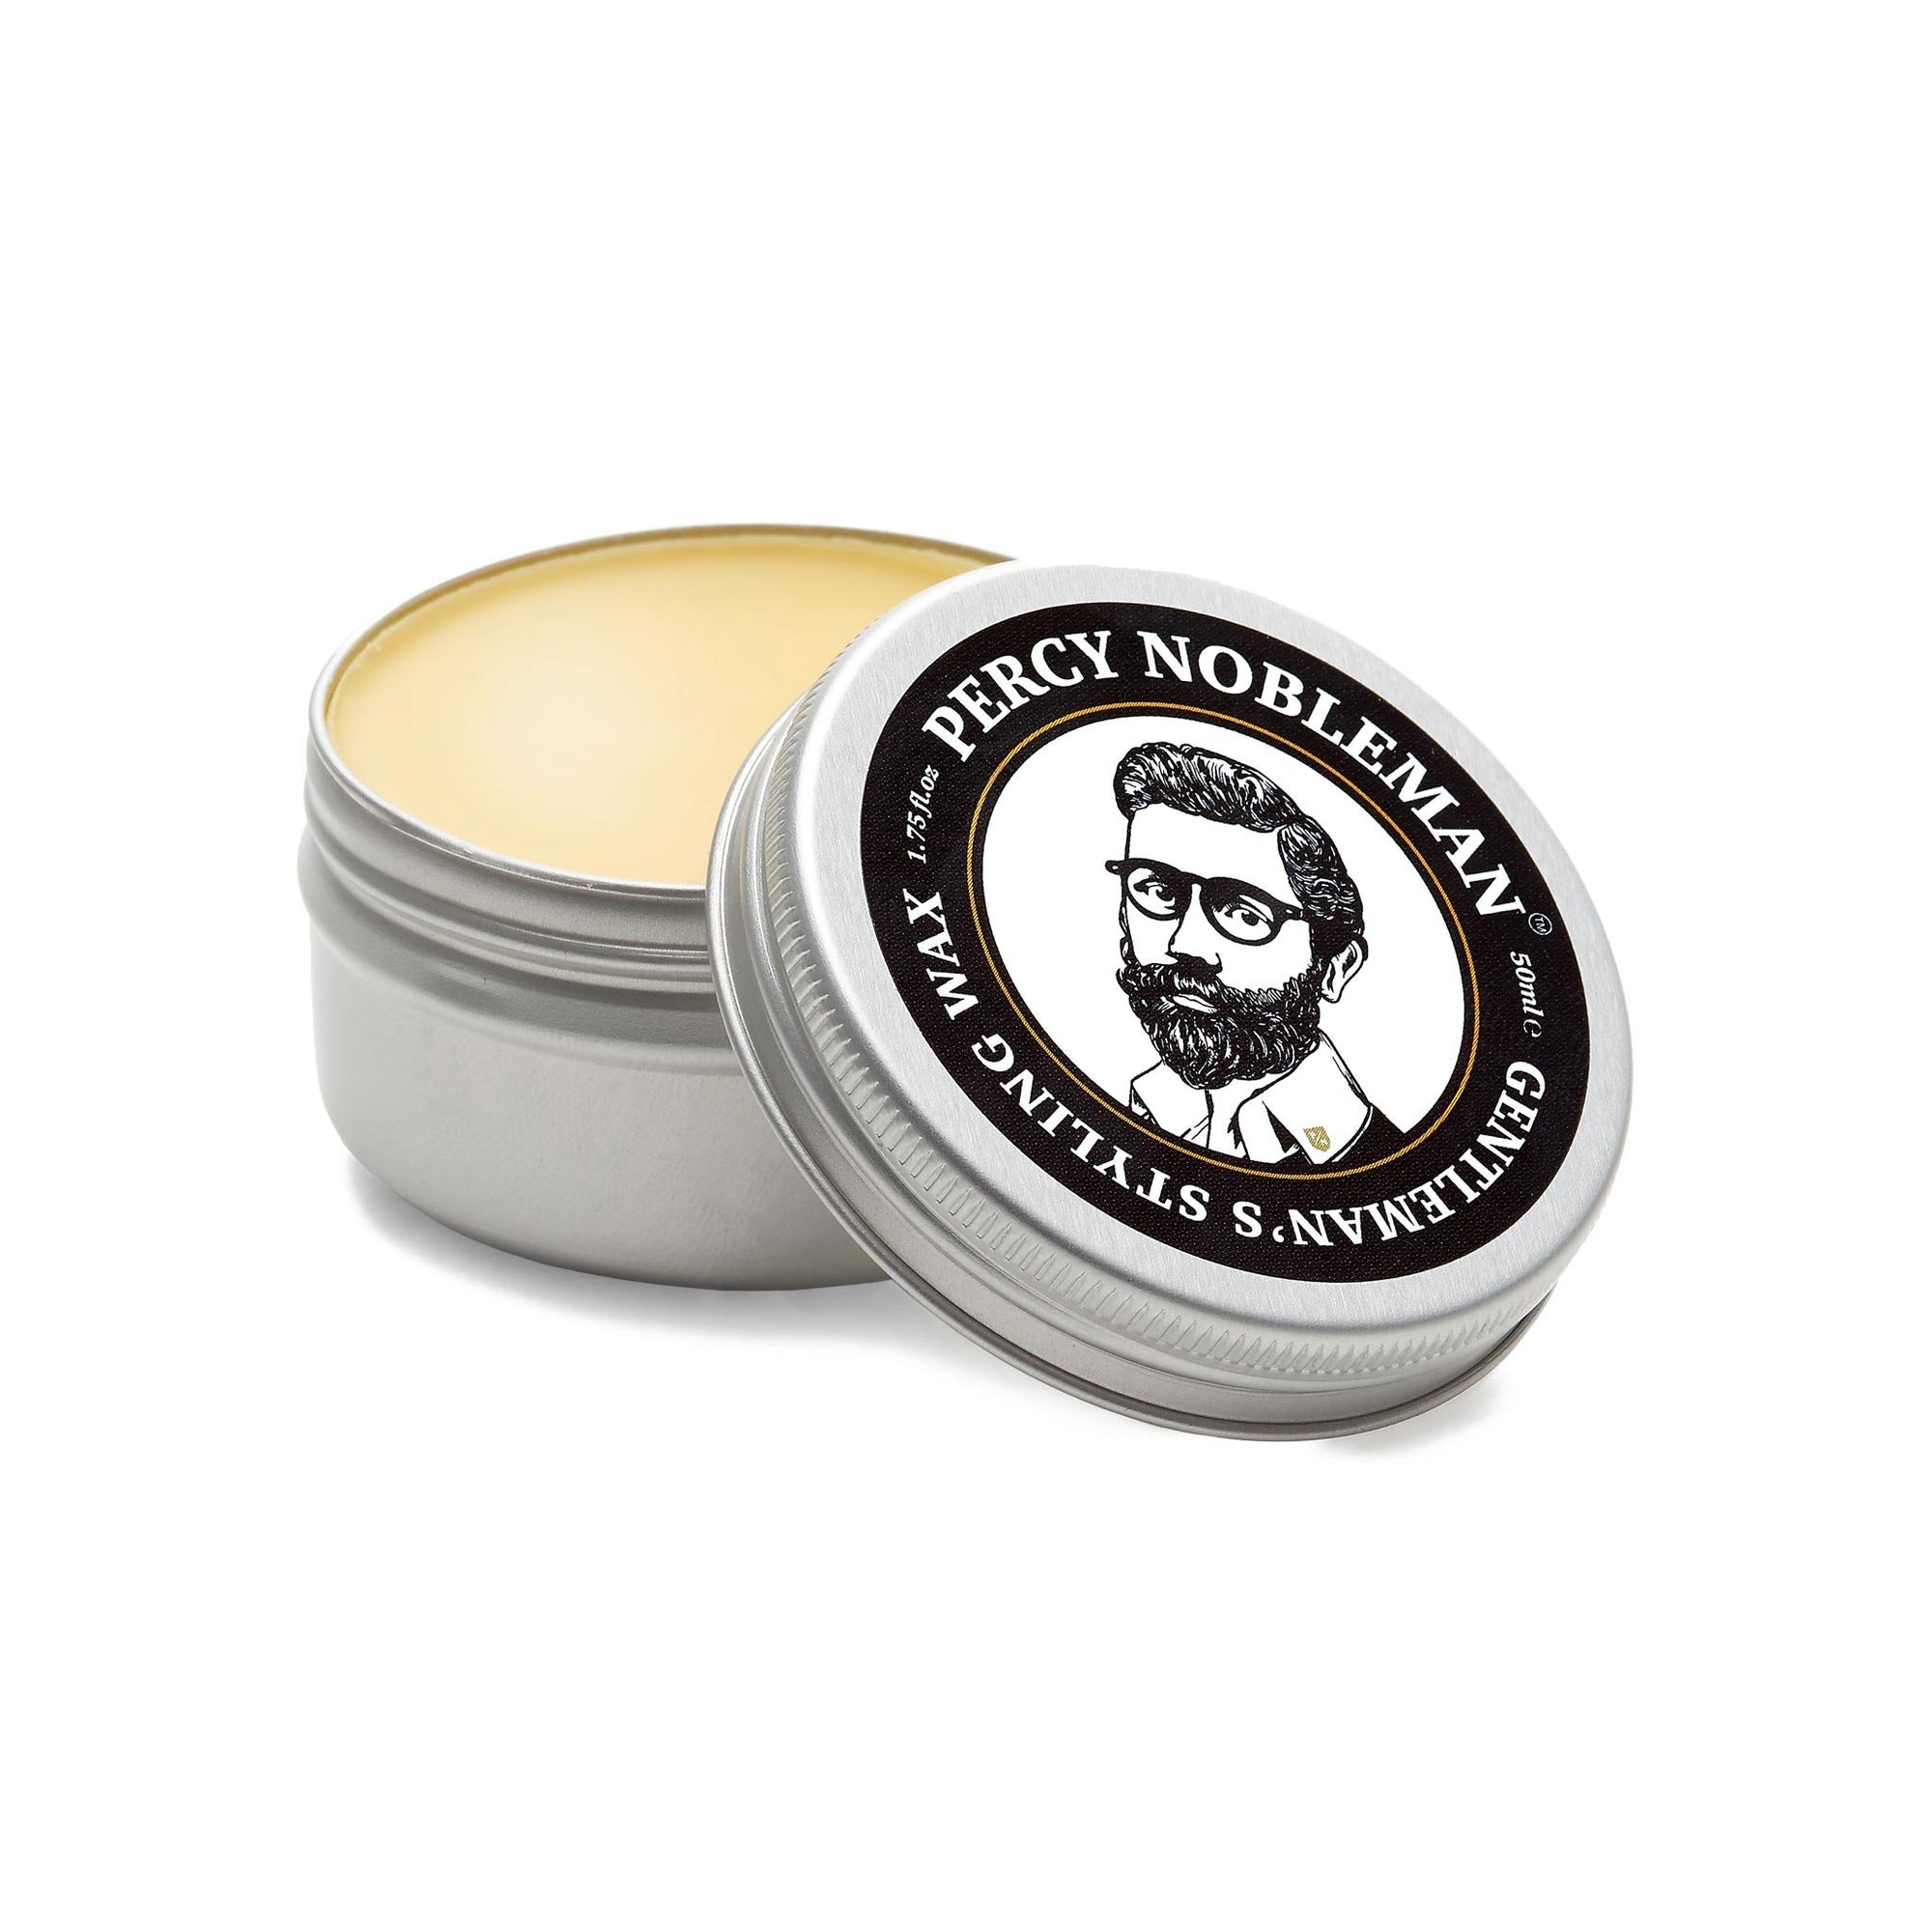 Percy Nobleman Styling Wax 50ml